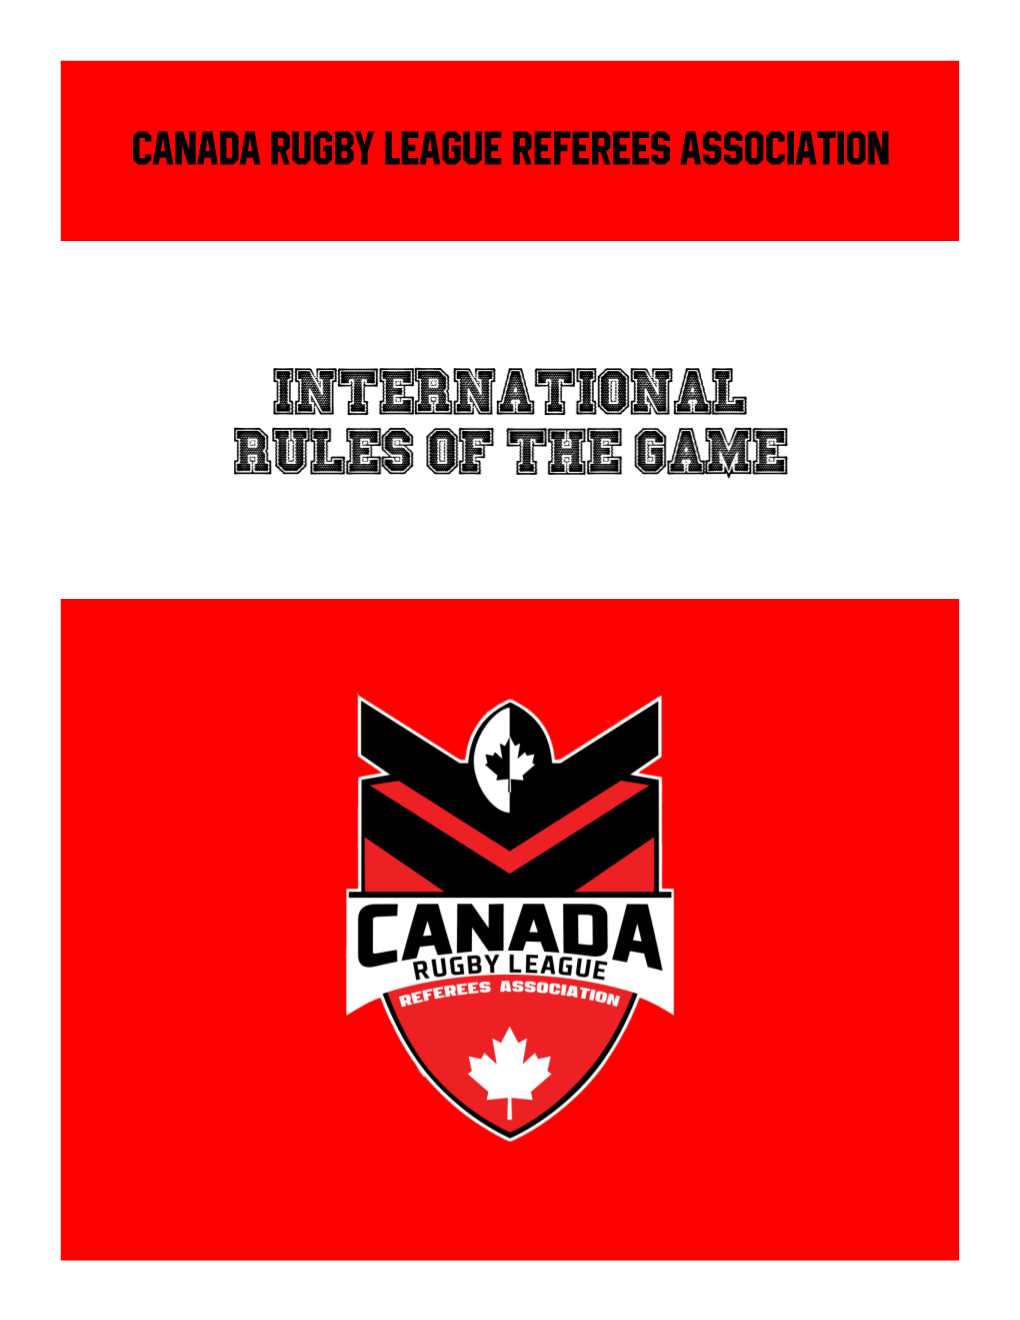 Canada Rugby League Referees Association